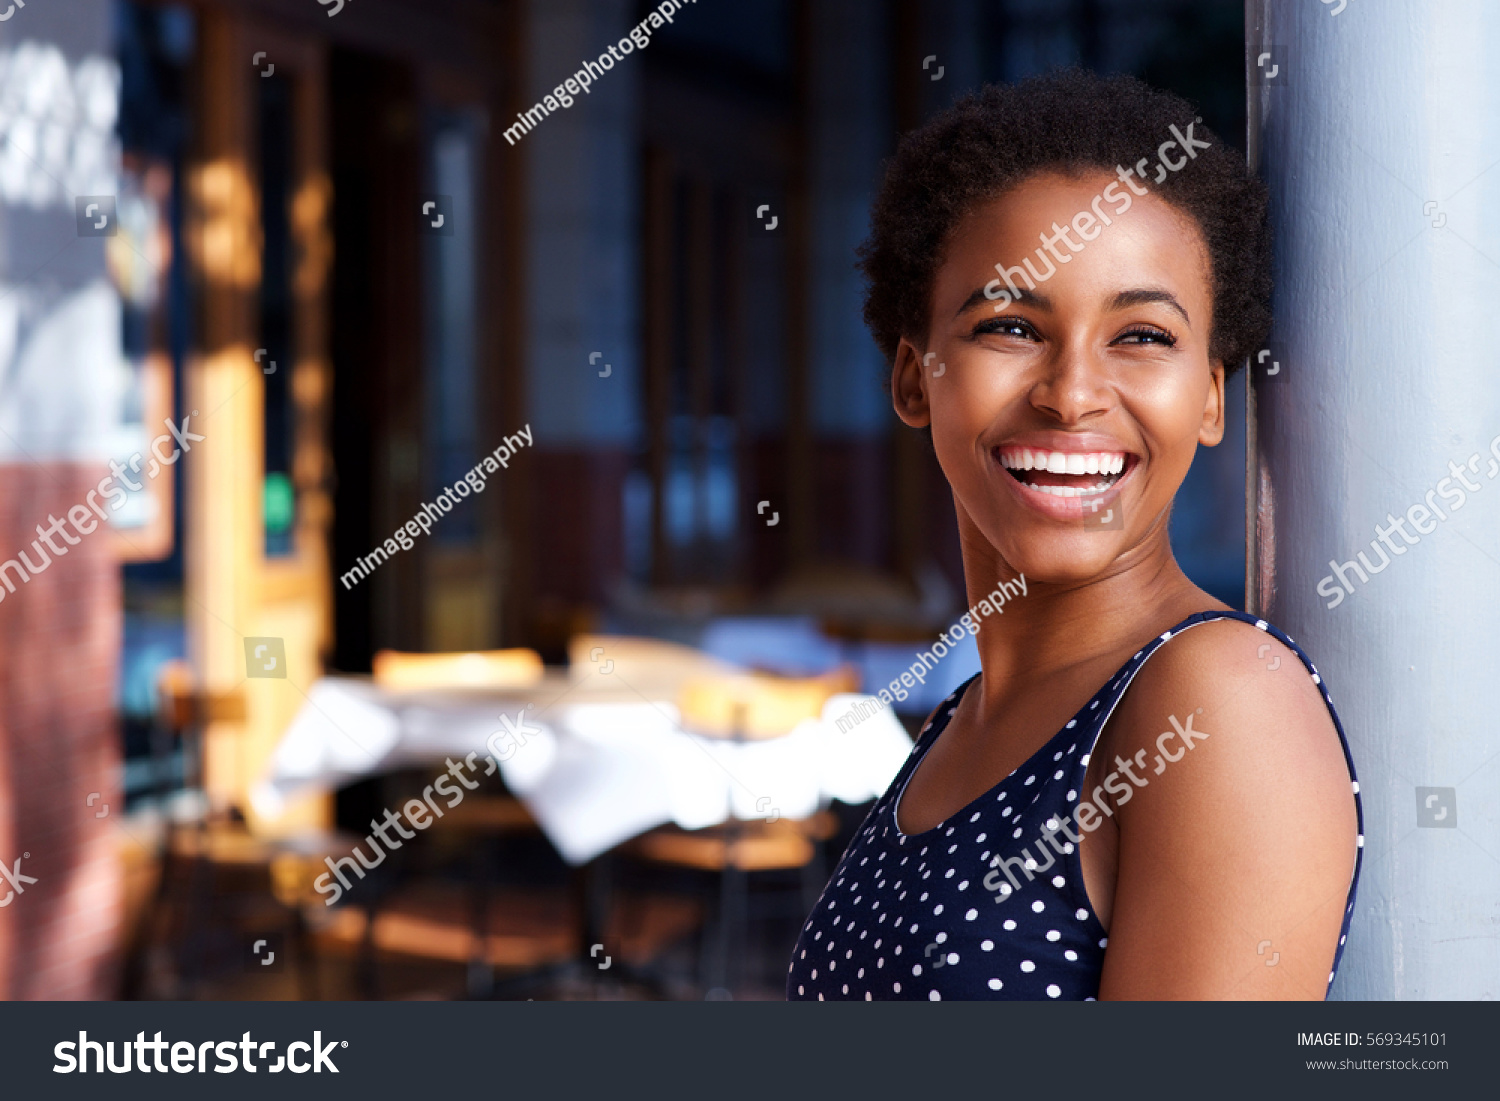 Side Portrait Smiling Young Black Woman Stock Photo 569345101 ...